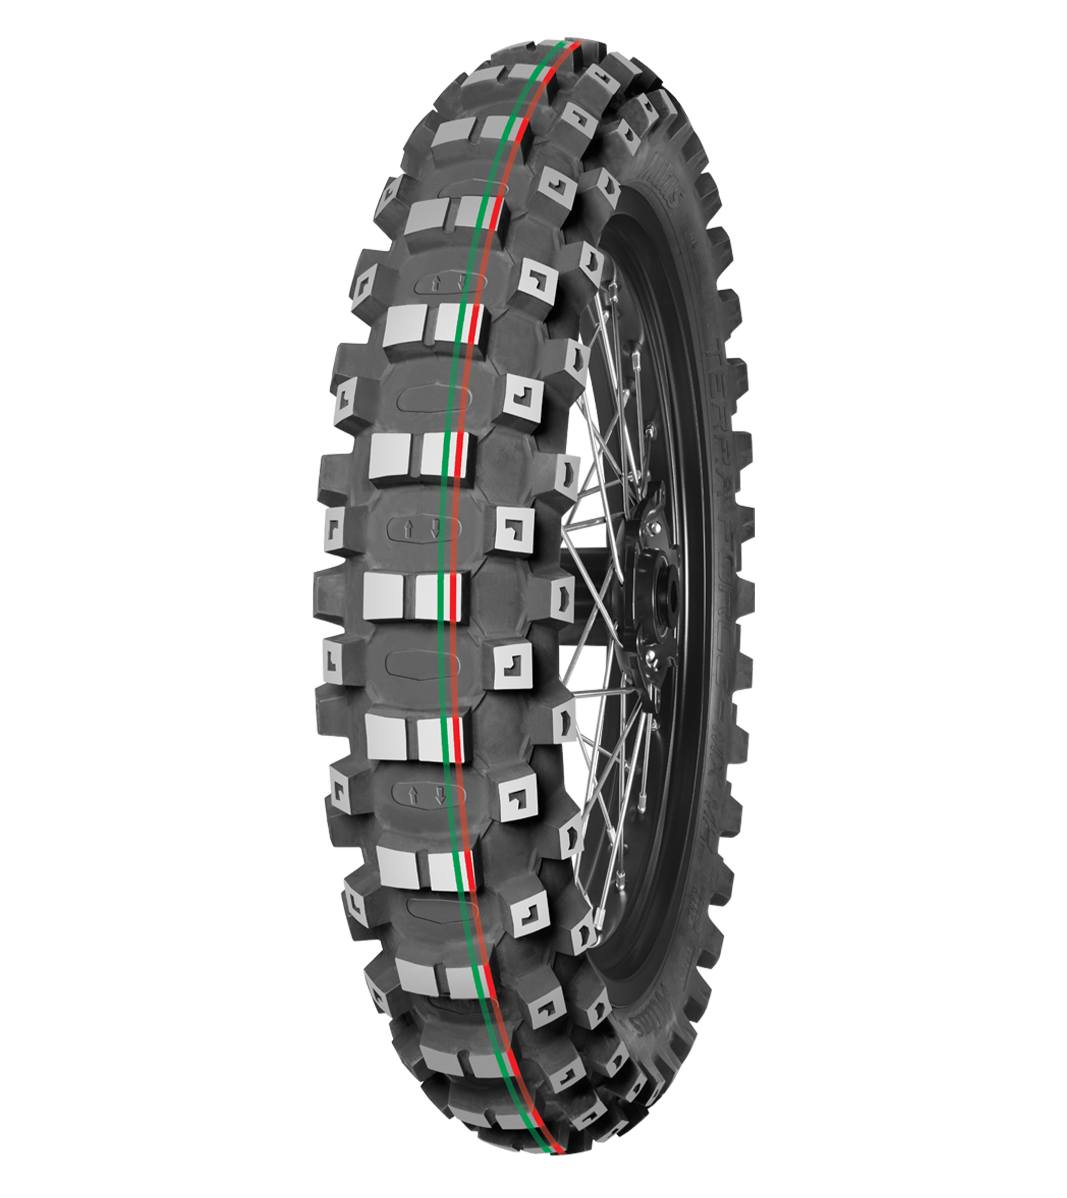 Mitas TERRA FORCE-MX MH 80/100-12 Motocross Competition Off-Road MEDIUM TO HARD 50M Red &amp; Green Tube Rear Tire, 226005, 80/100-12, Motocross, Motocross Competition, Off-Road, Rear, Terra Force, Terra Force-MX MH, Trail, Tires - Imported and distributed in North &amp; South America by Lindeco Genuine Powersports - Premier Powersports Equipment and Accessories for Motorcycle Enthusiasts, Professional Riders and Dealers.